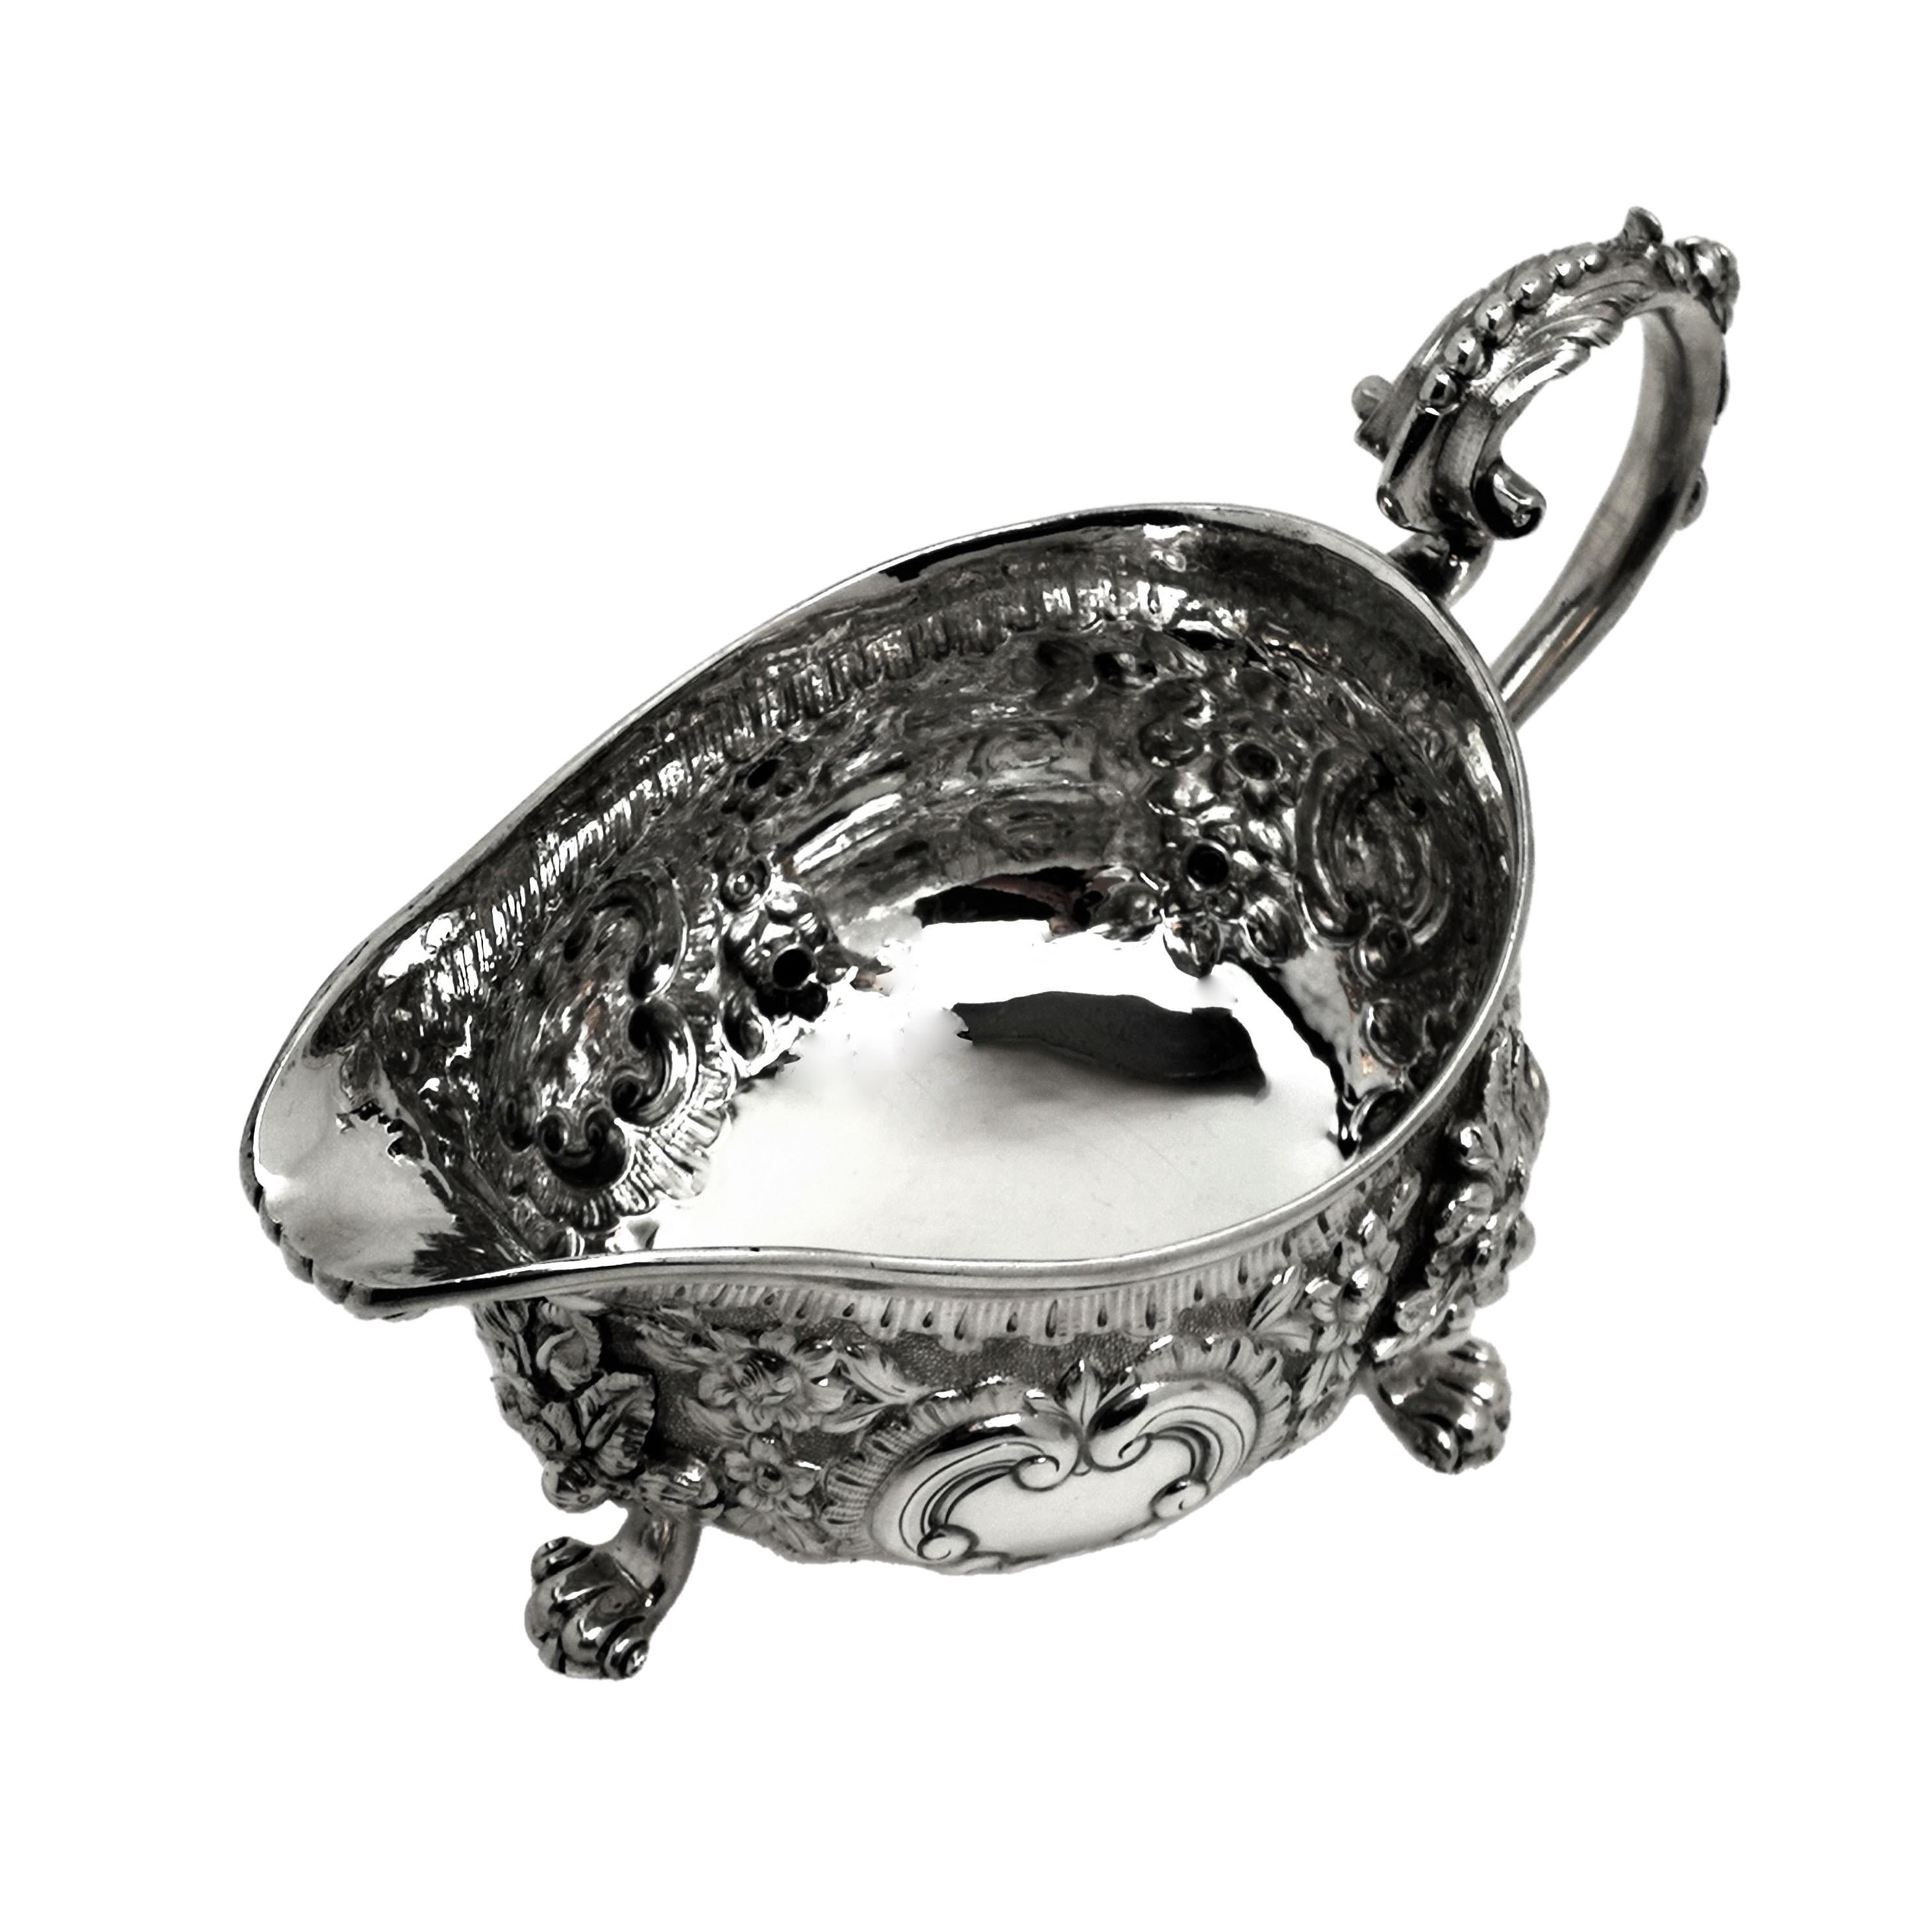 Pair of Georgian Sterling Silver Sauce Boats / Gravy Jugs George IV, 1820 For Sale 3